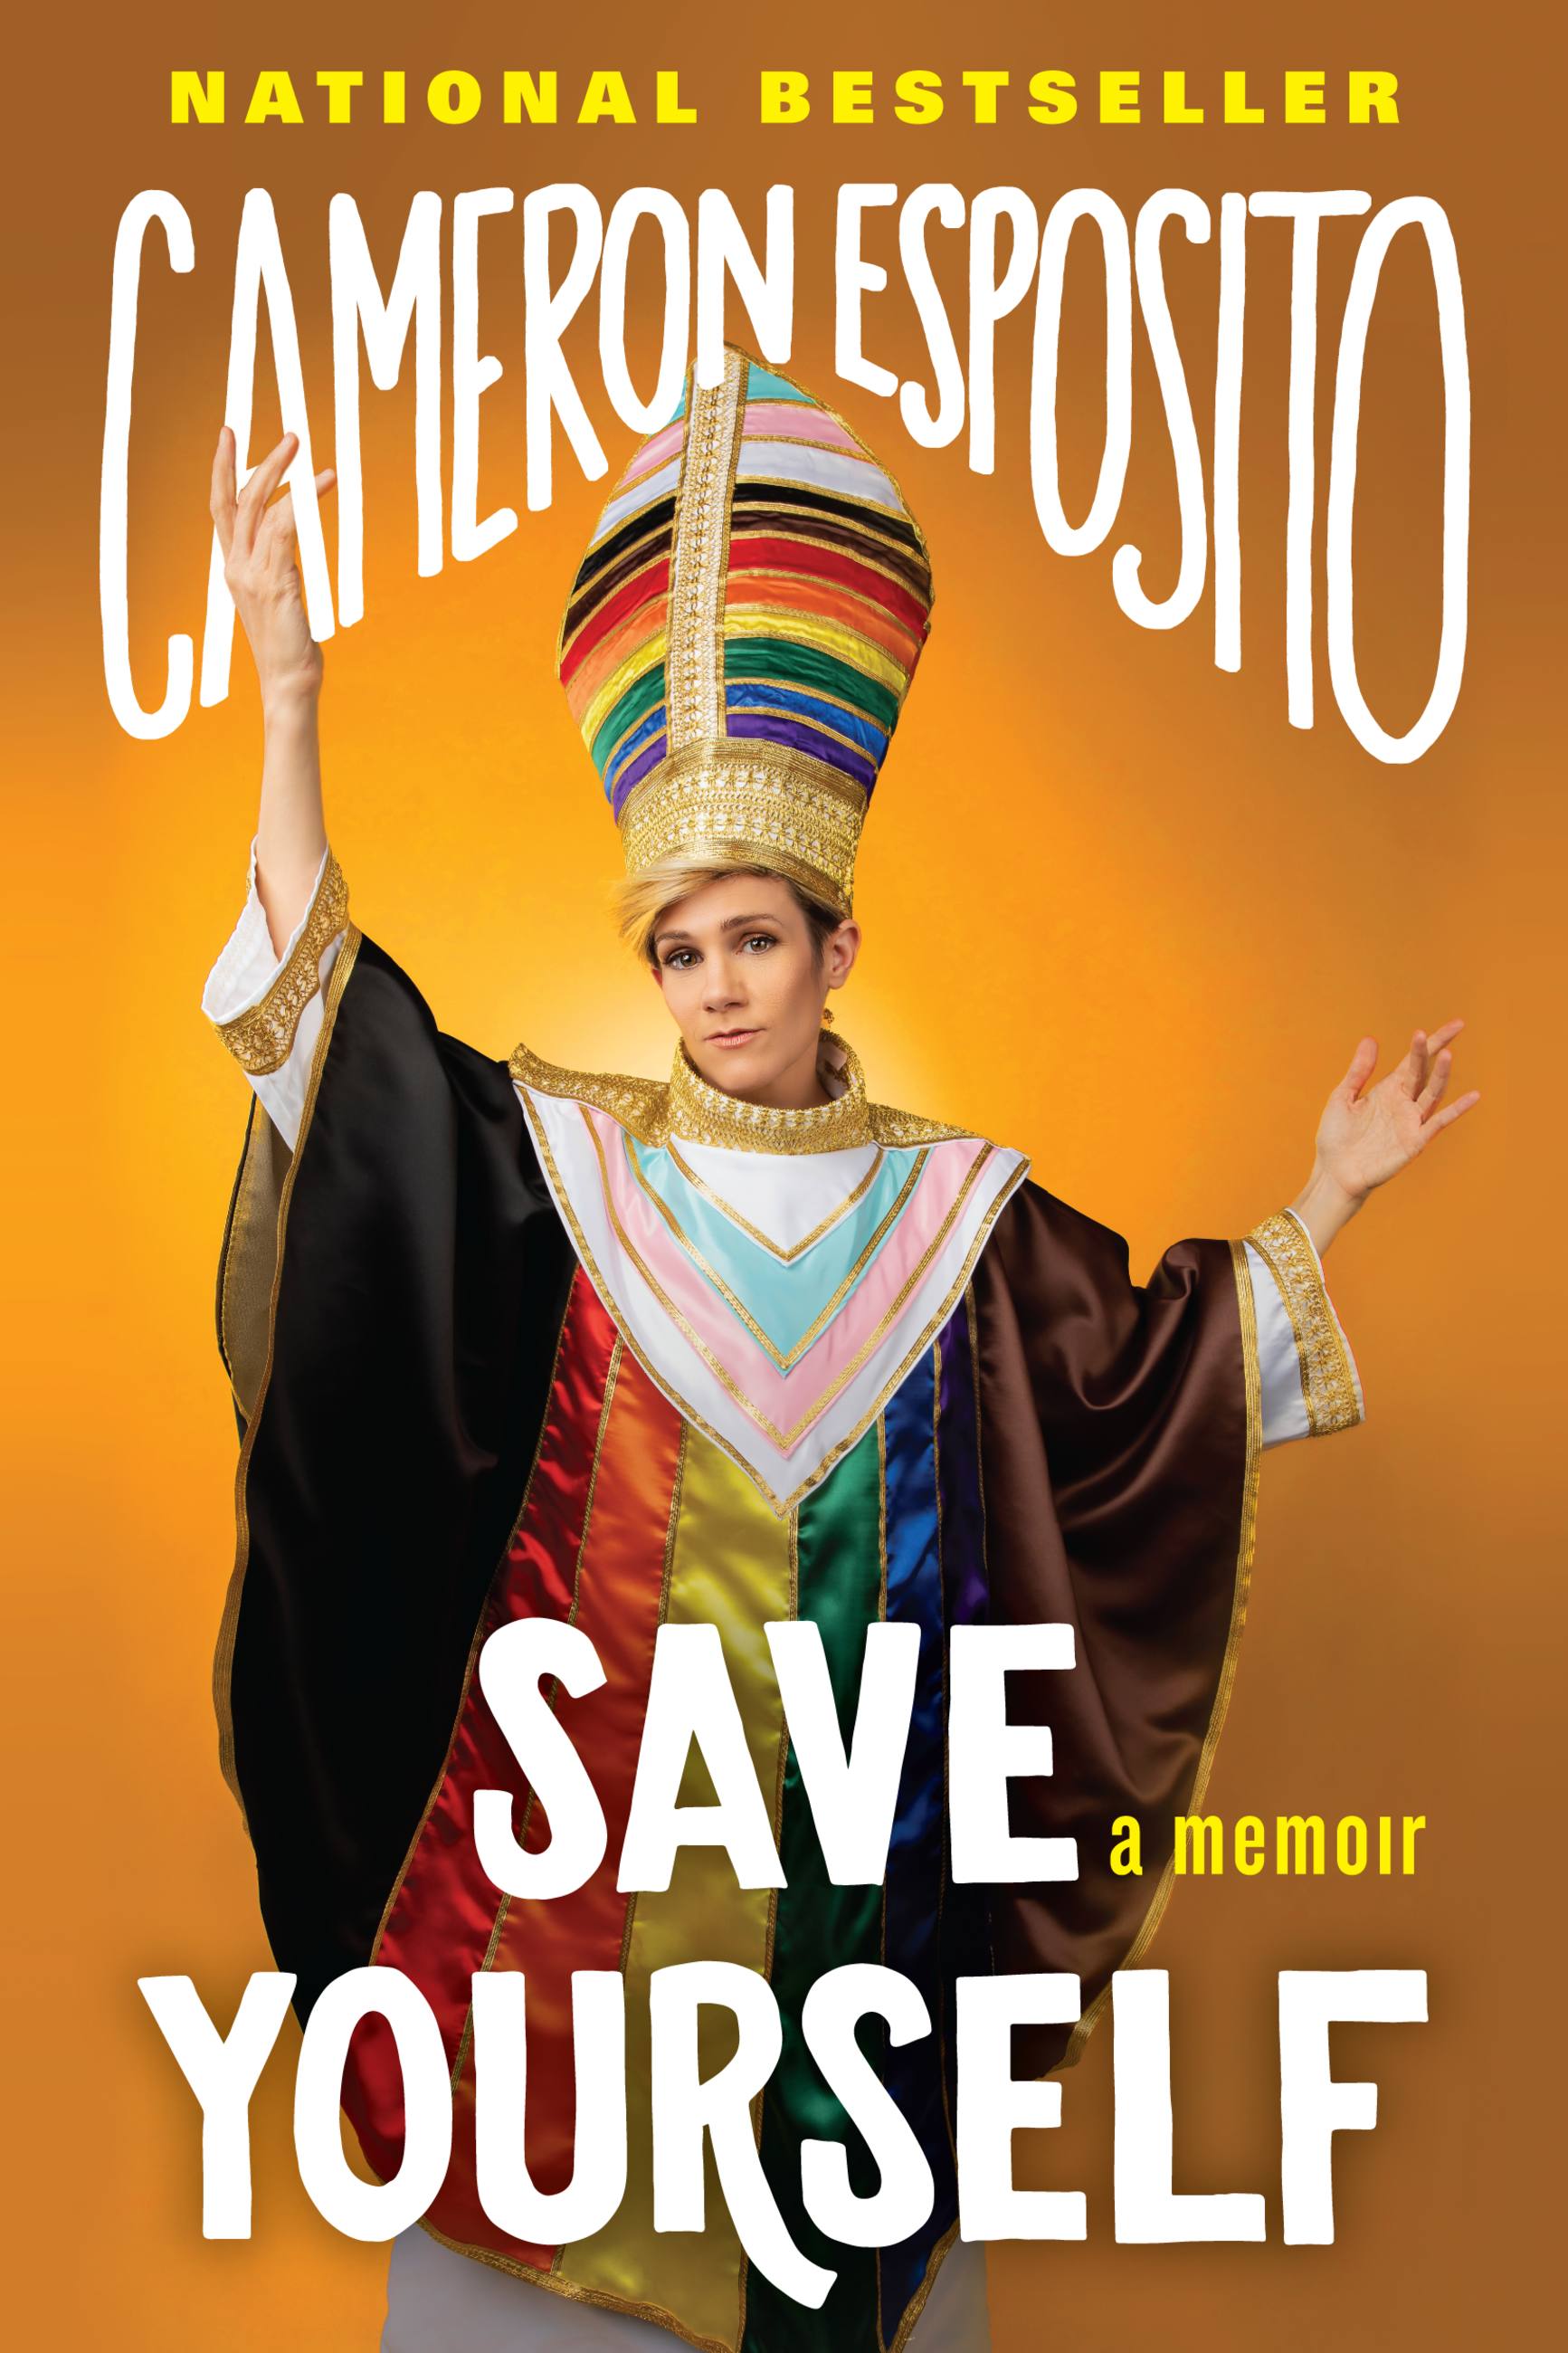 Save Yourself by Cameron Esposito Hachette Book Group